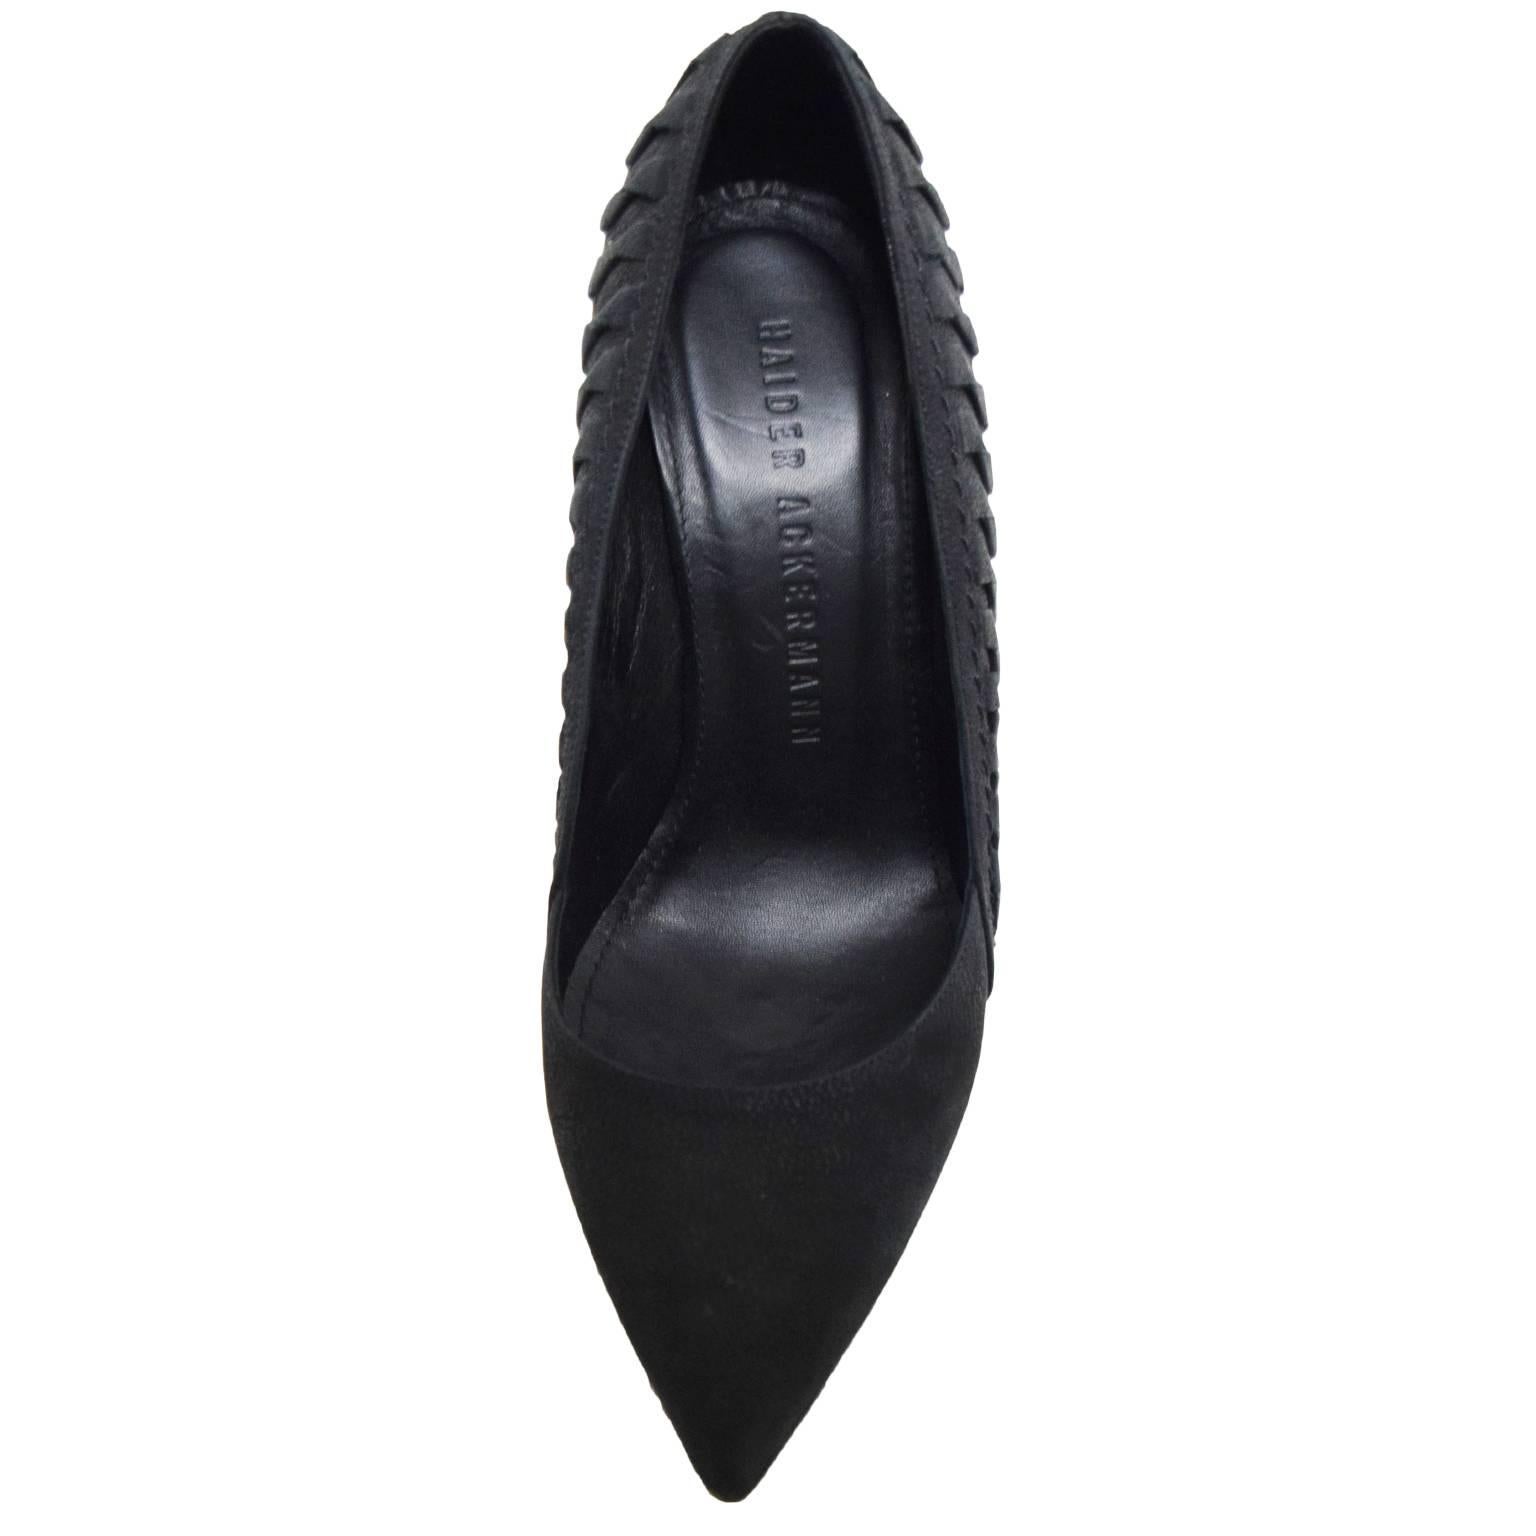 These Haider Ackerman pumps are matte leather and have side twisted leather creating a ribbed like side detail. The heel size is 4.5